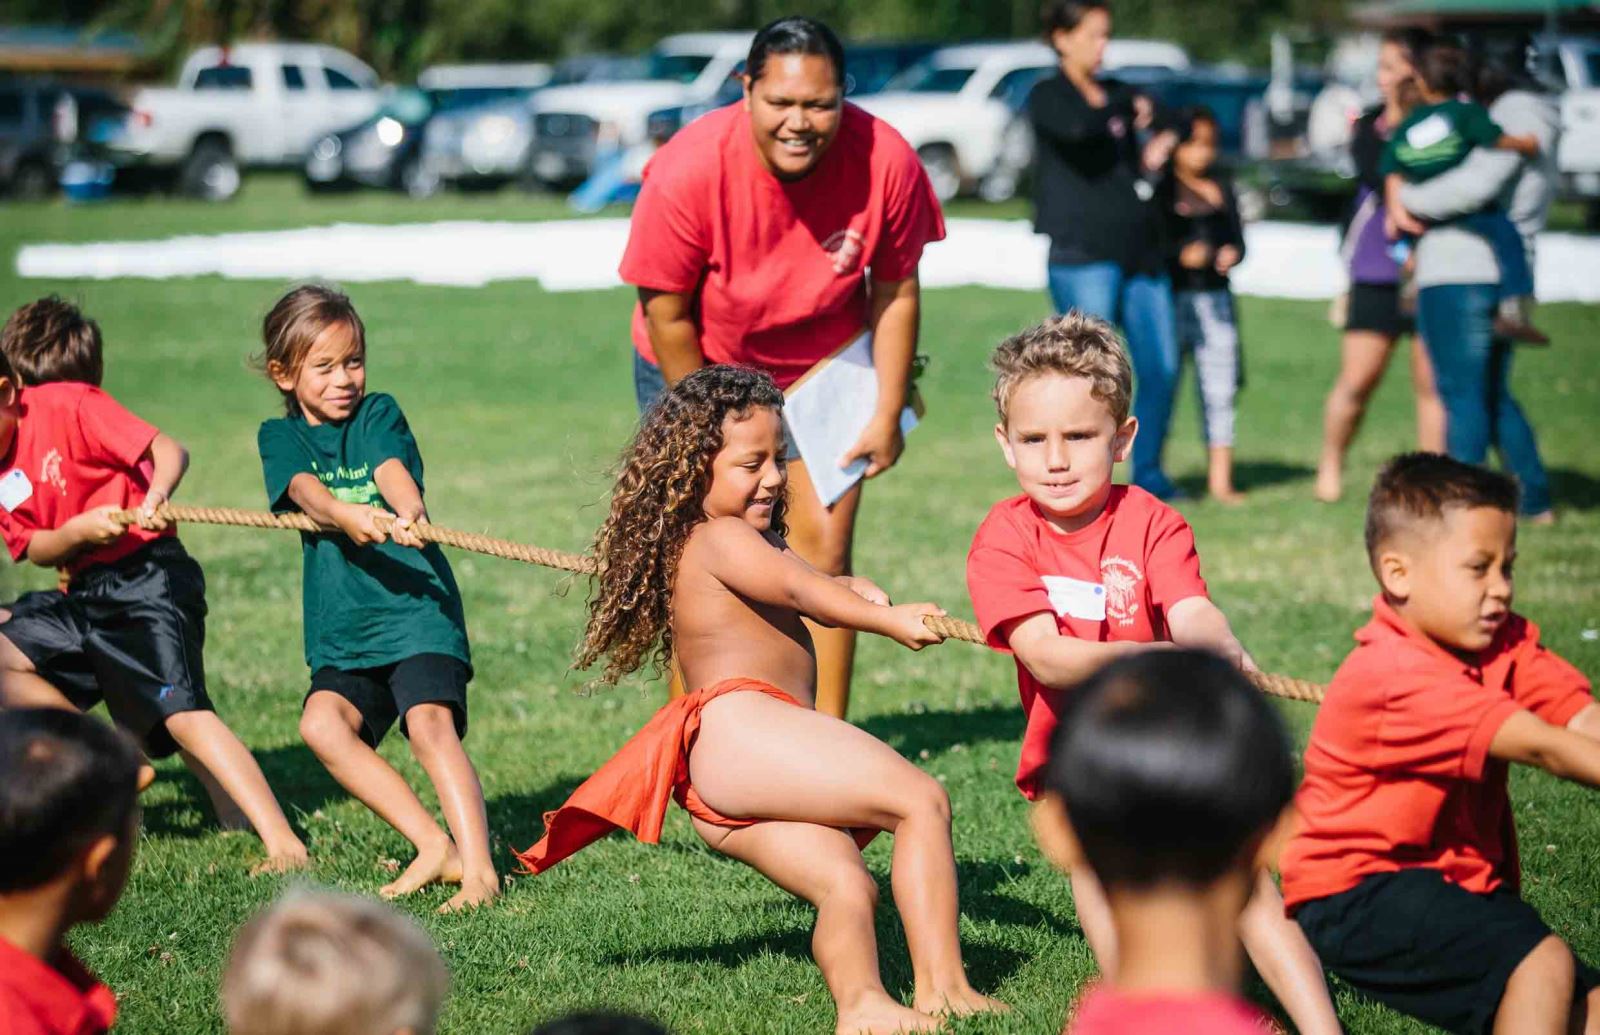 Makahiki Games is always a fun part during this occasion for everyone